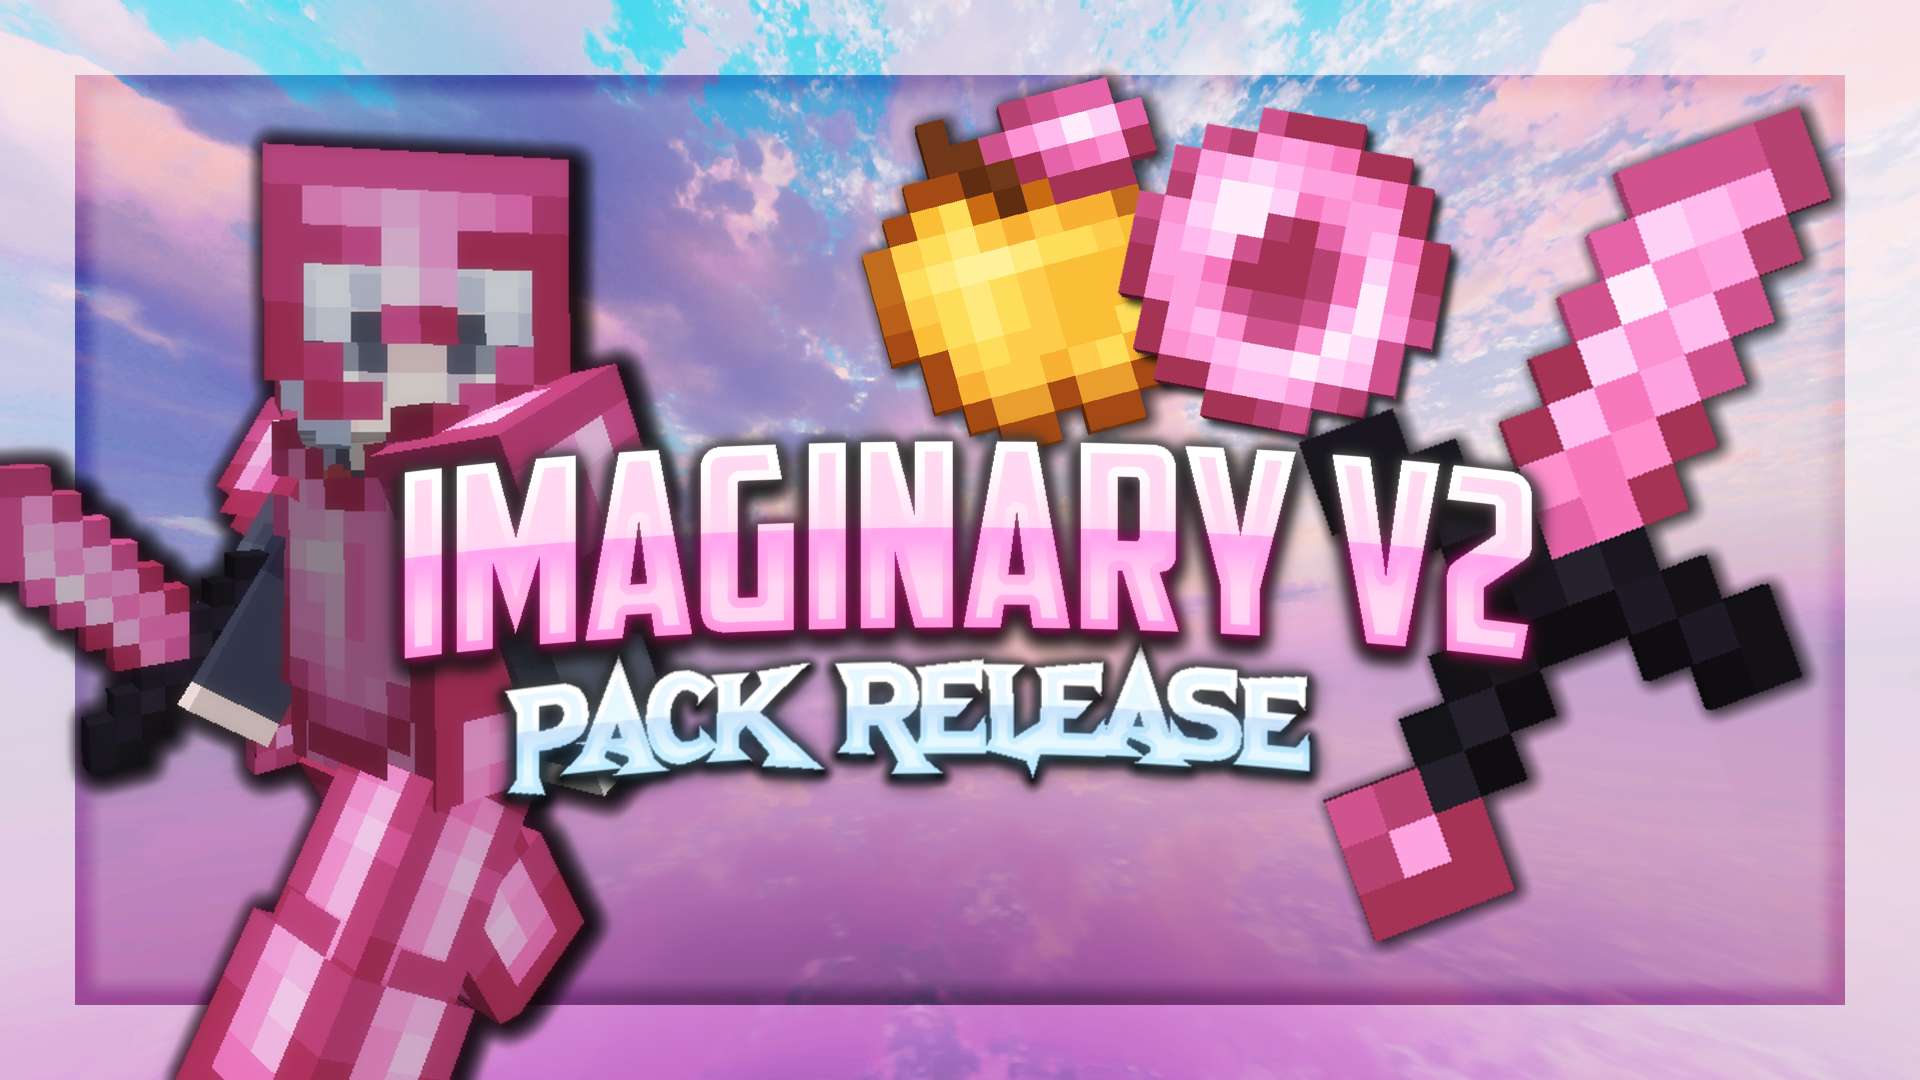 Gallery Banner for Imaginary V2 on PvPRP